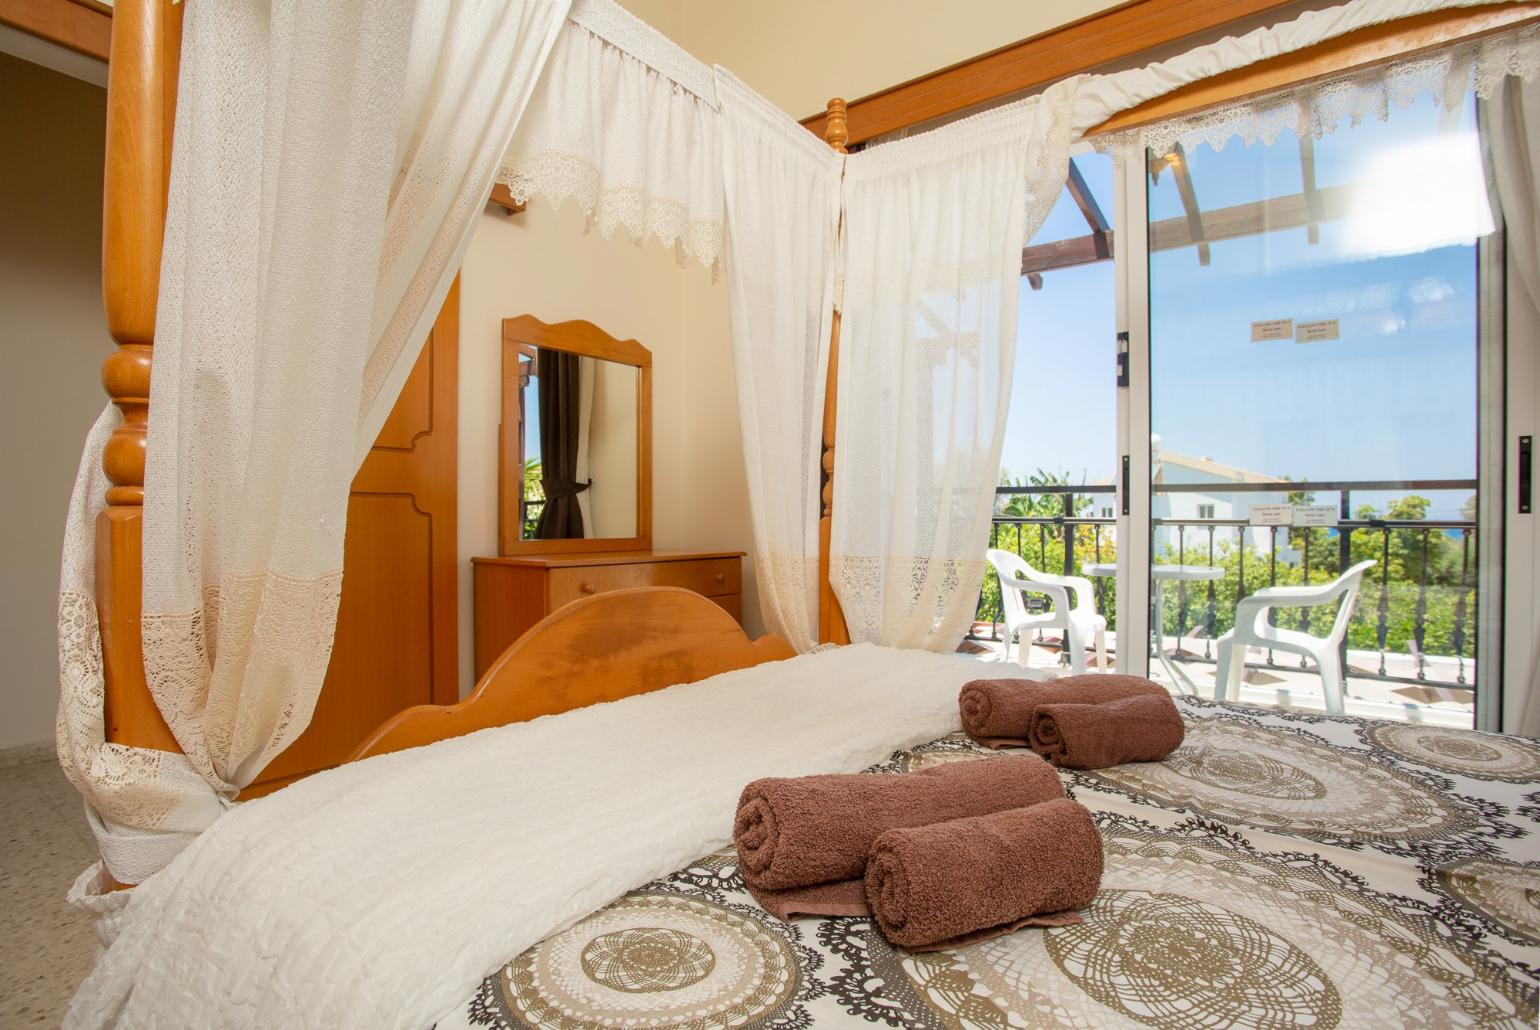 Double bedroom with en suite bathroom, A/C and balcony access with sea views